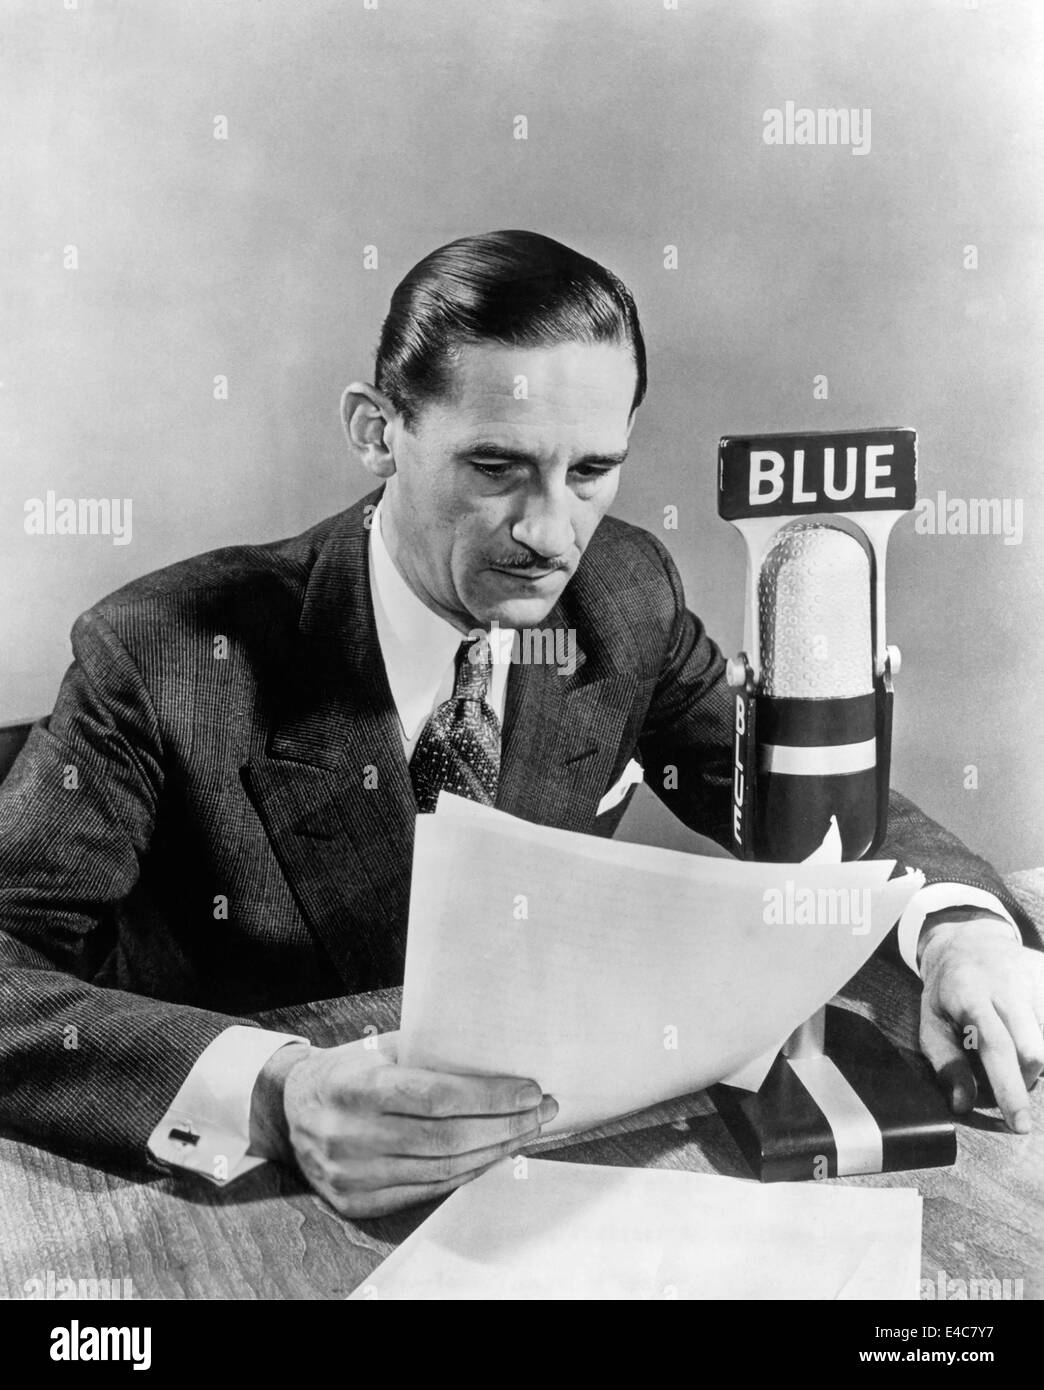 Westbrook Van Voorhis, Narrator for TV Programs and Movies, Appearing on Blue's Network 'March of Time', circa early 1930's Stock Photo